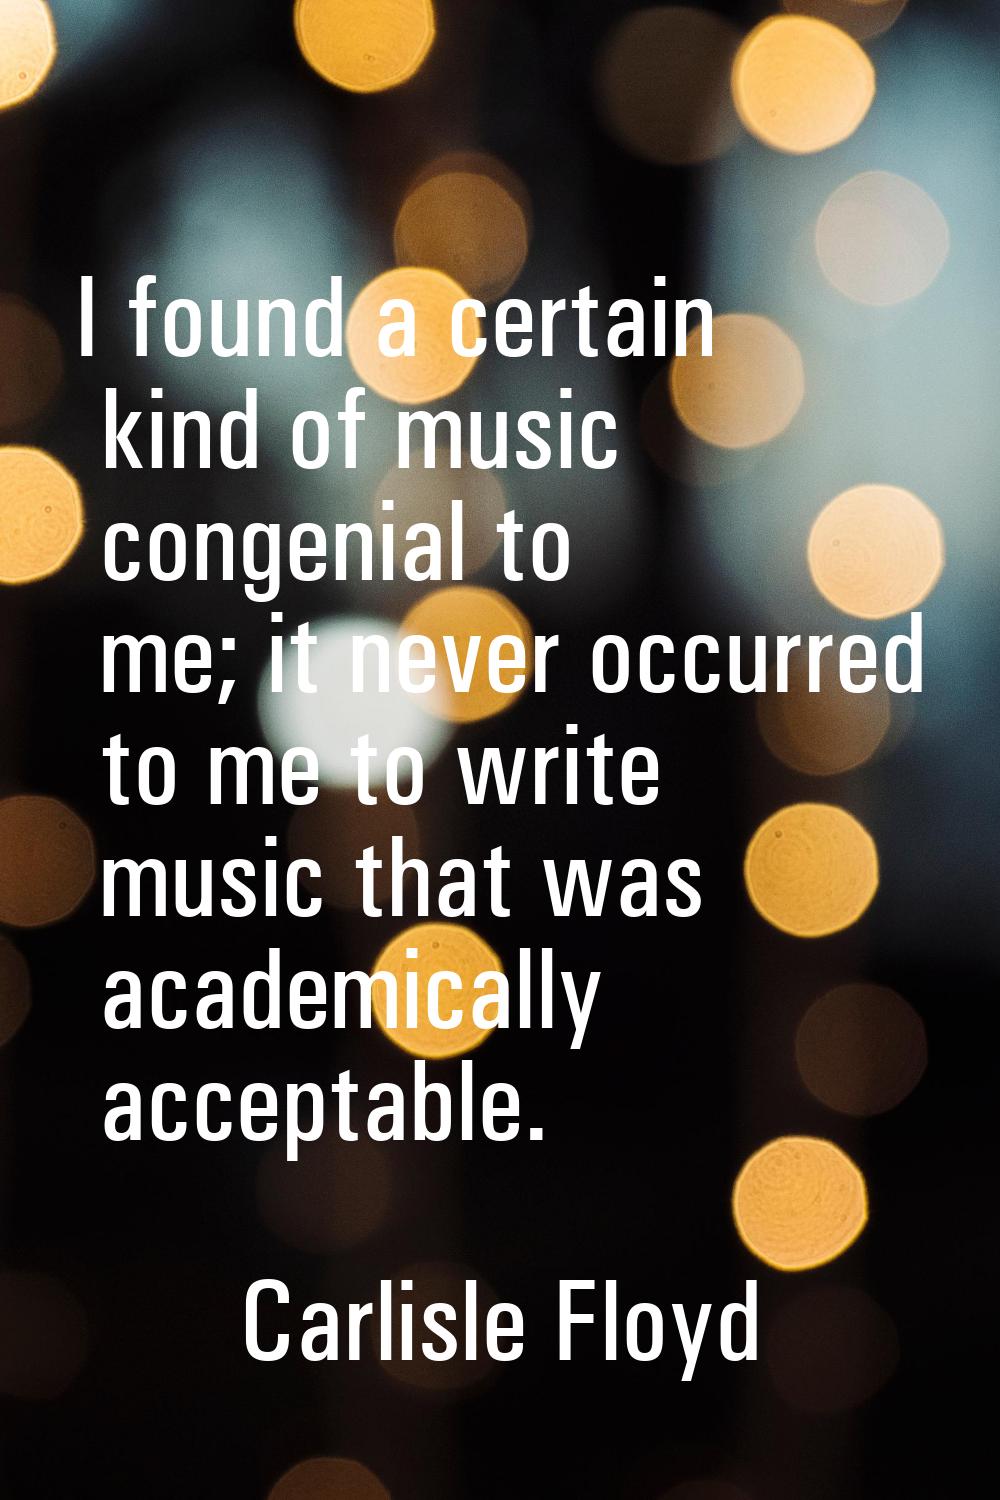 I found a certain kind of music congenial to me; it never occurred to me to write music that was ac